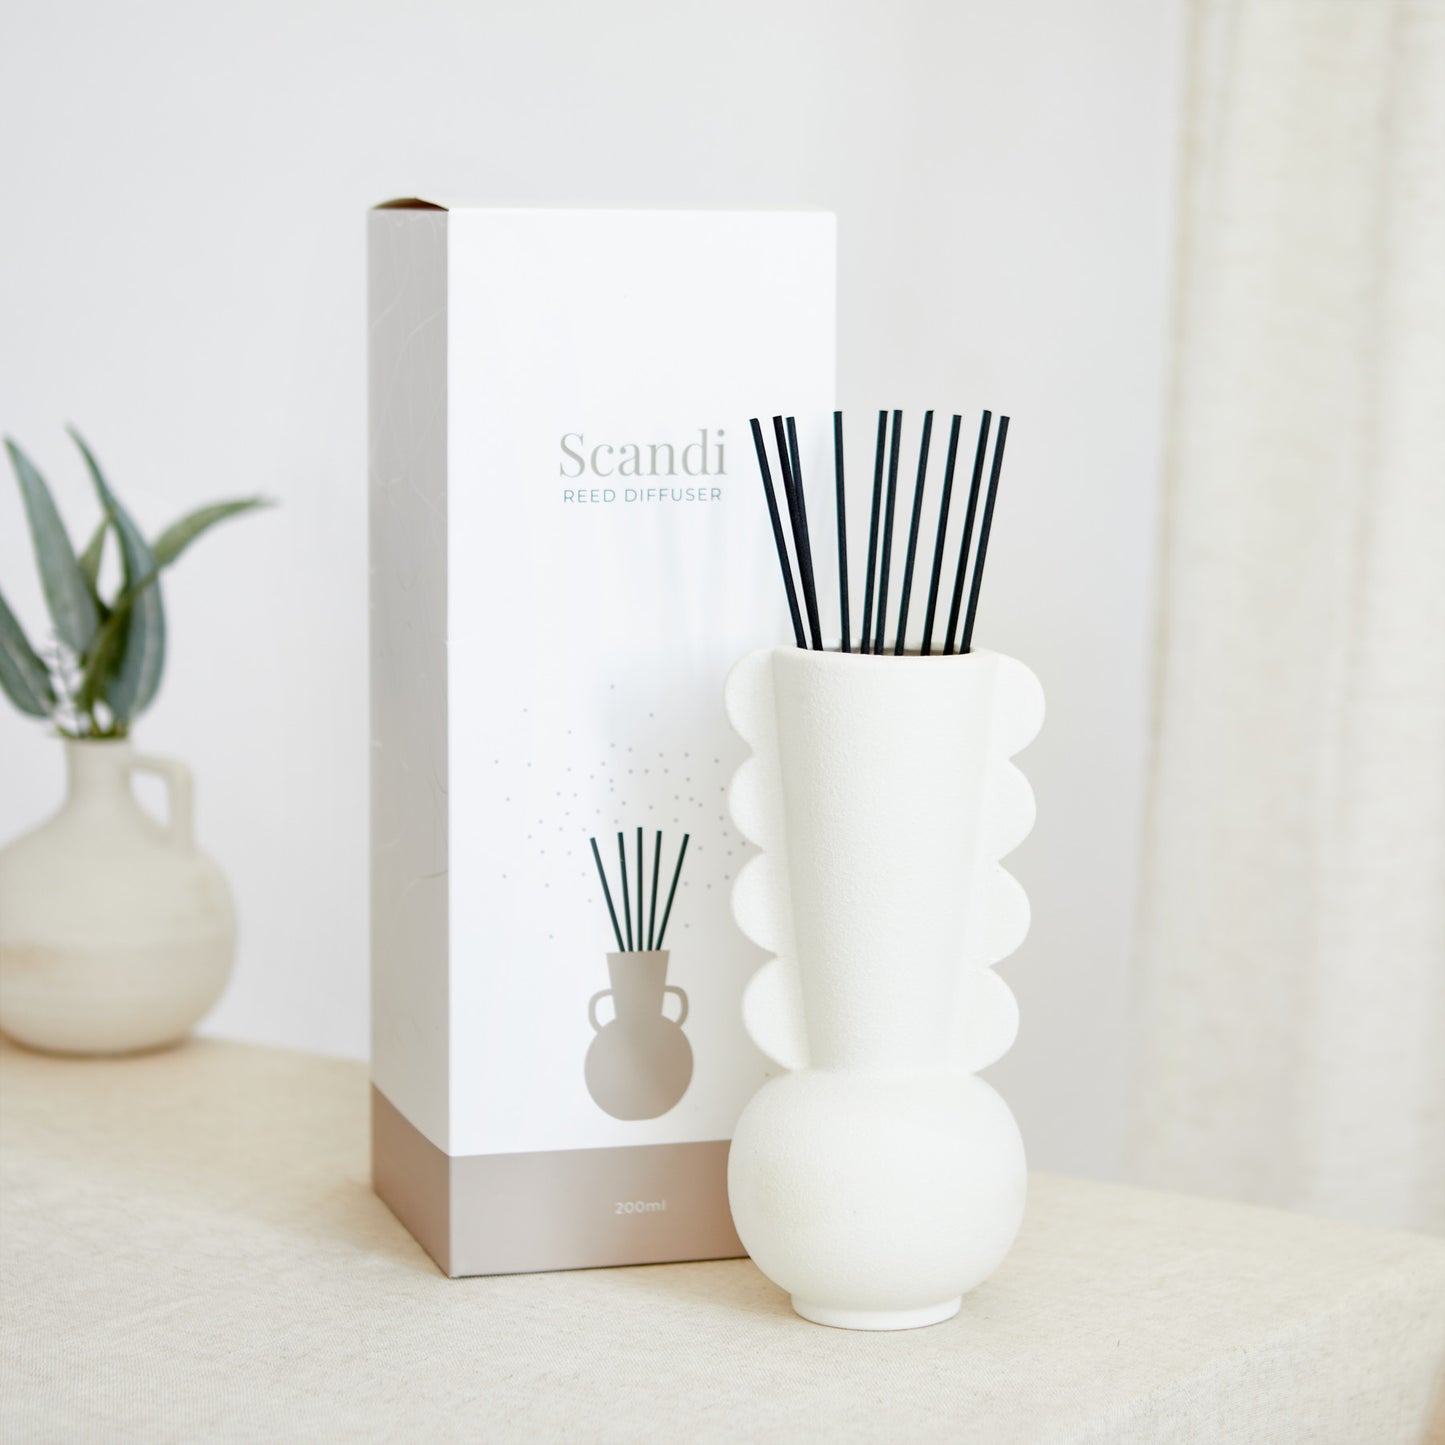 Scandi: Oslo Bjerke Statement Reed Diffuser - Activated Charcoal & Matcha